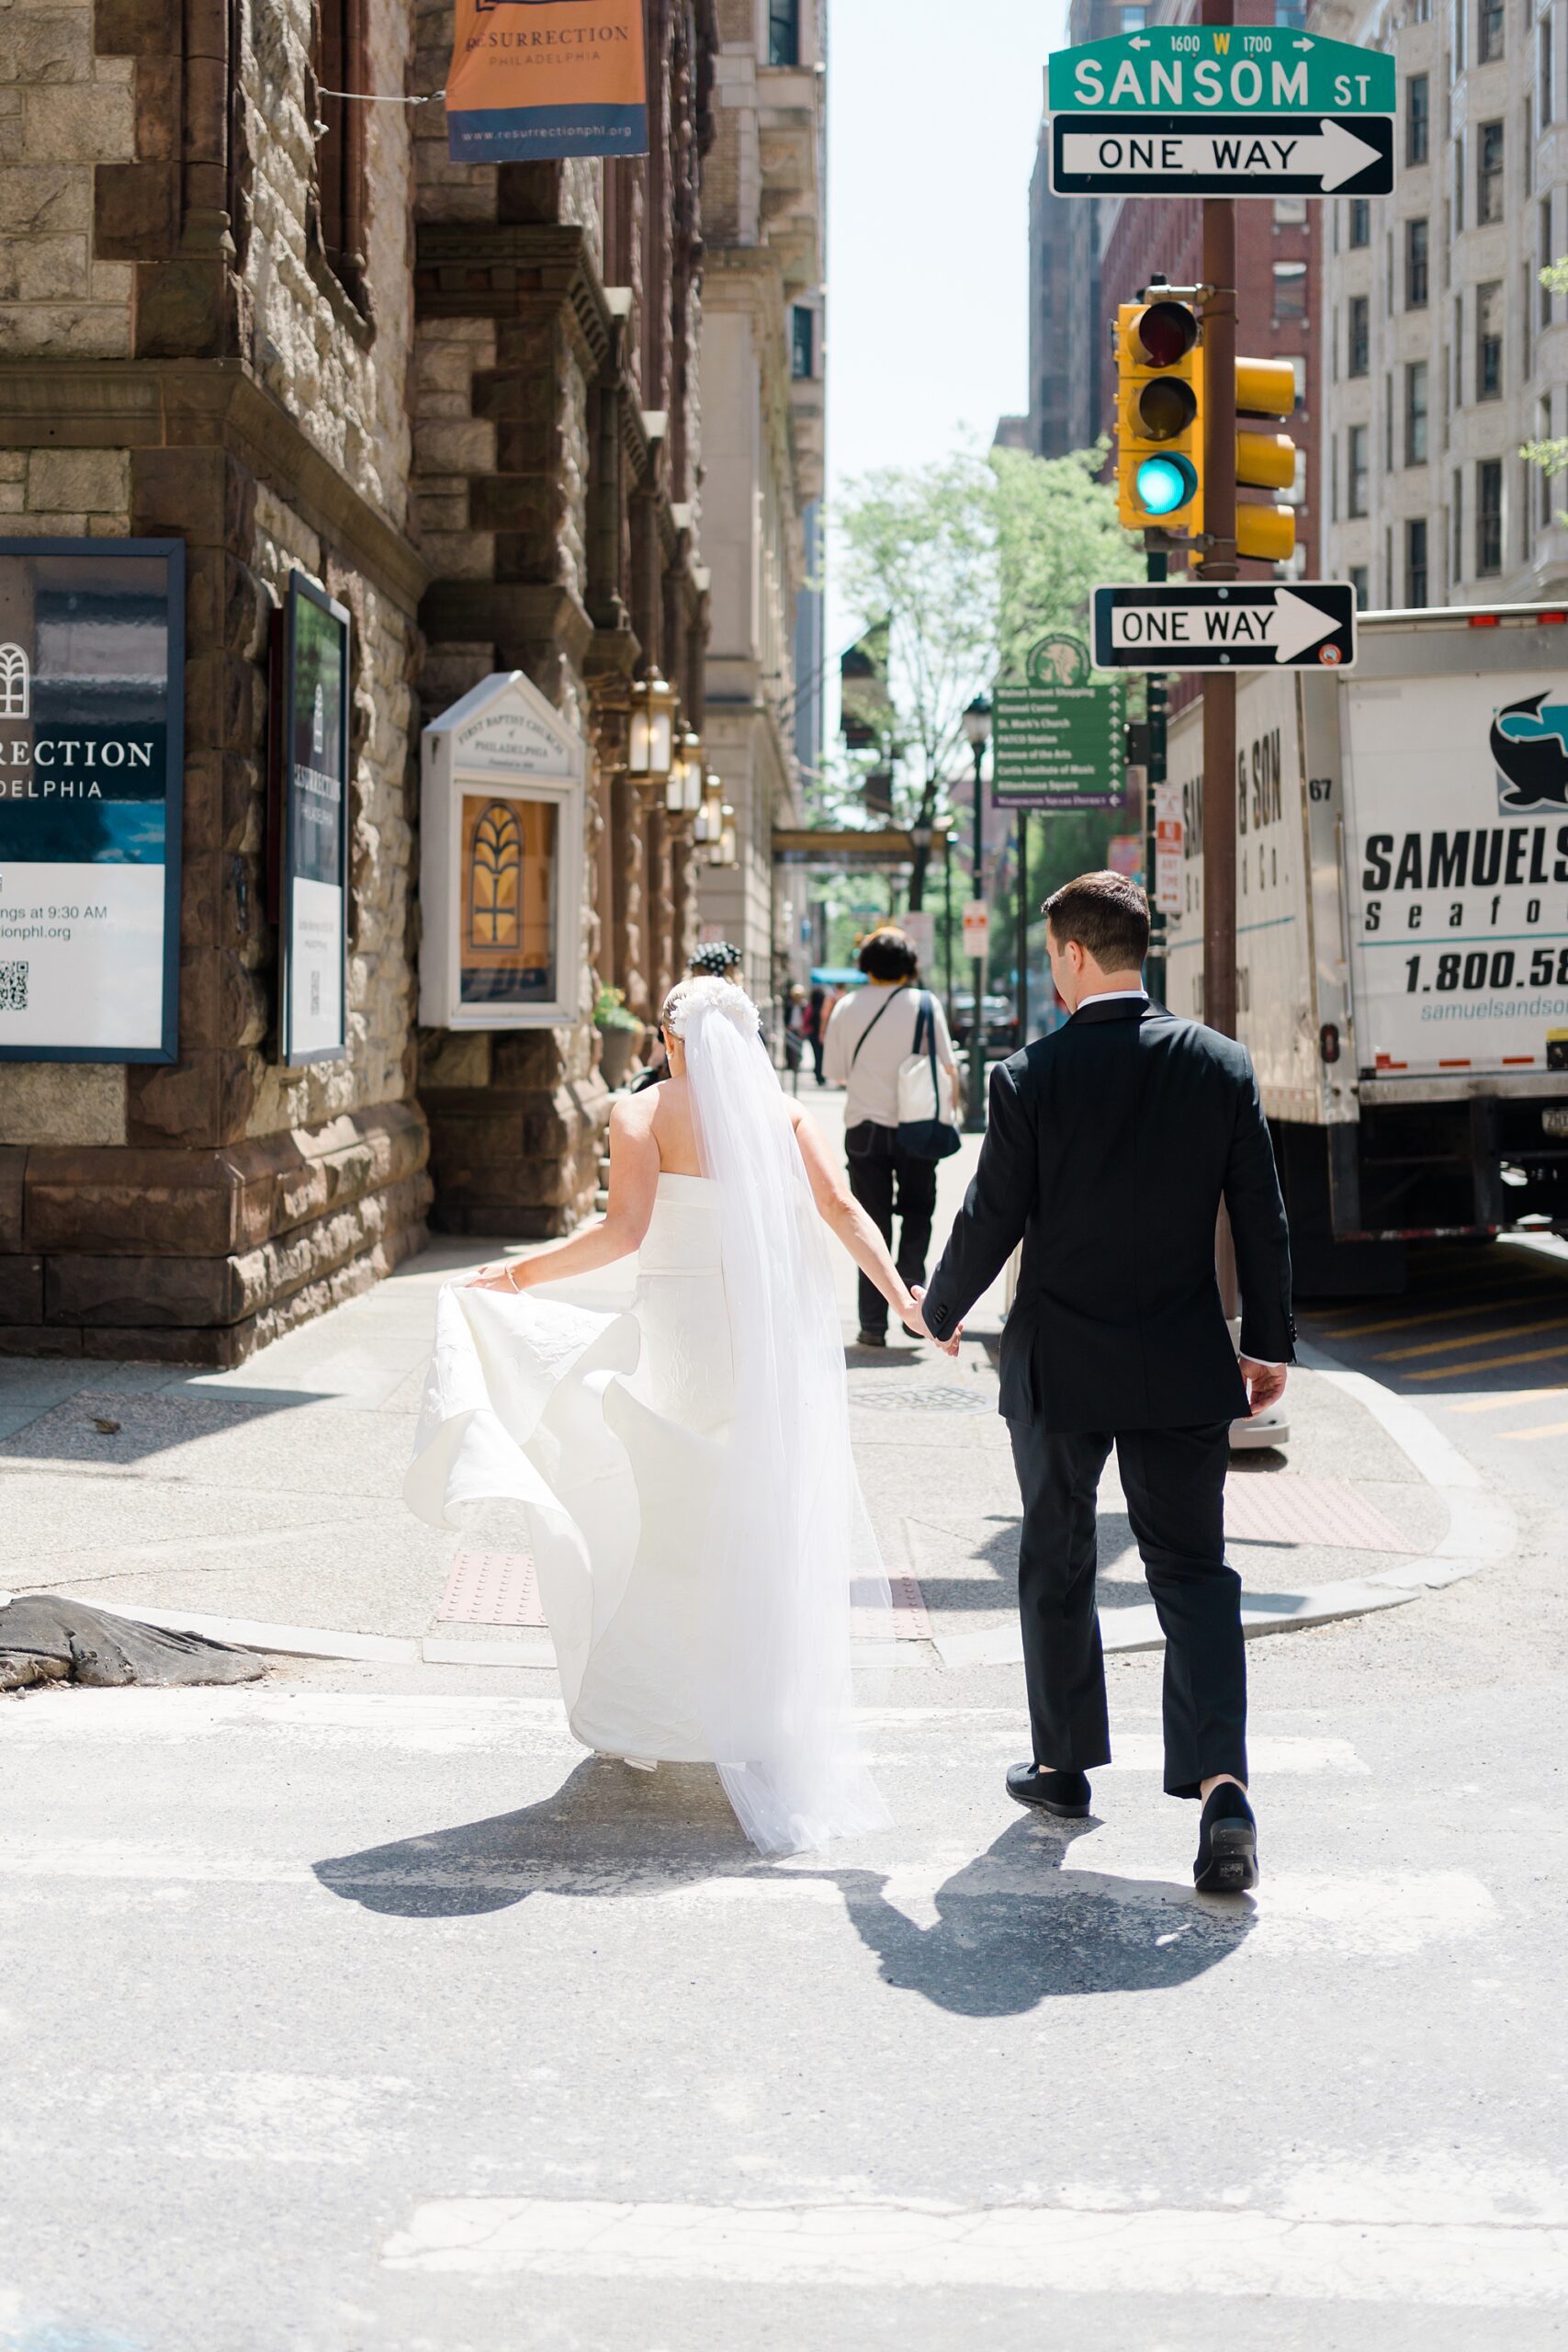 bride and groom walk down street holding hands